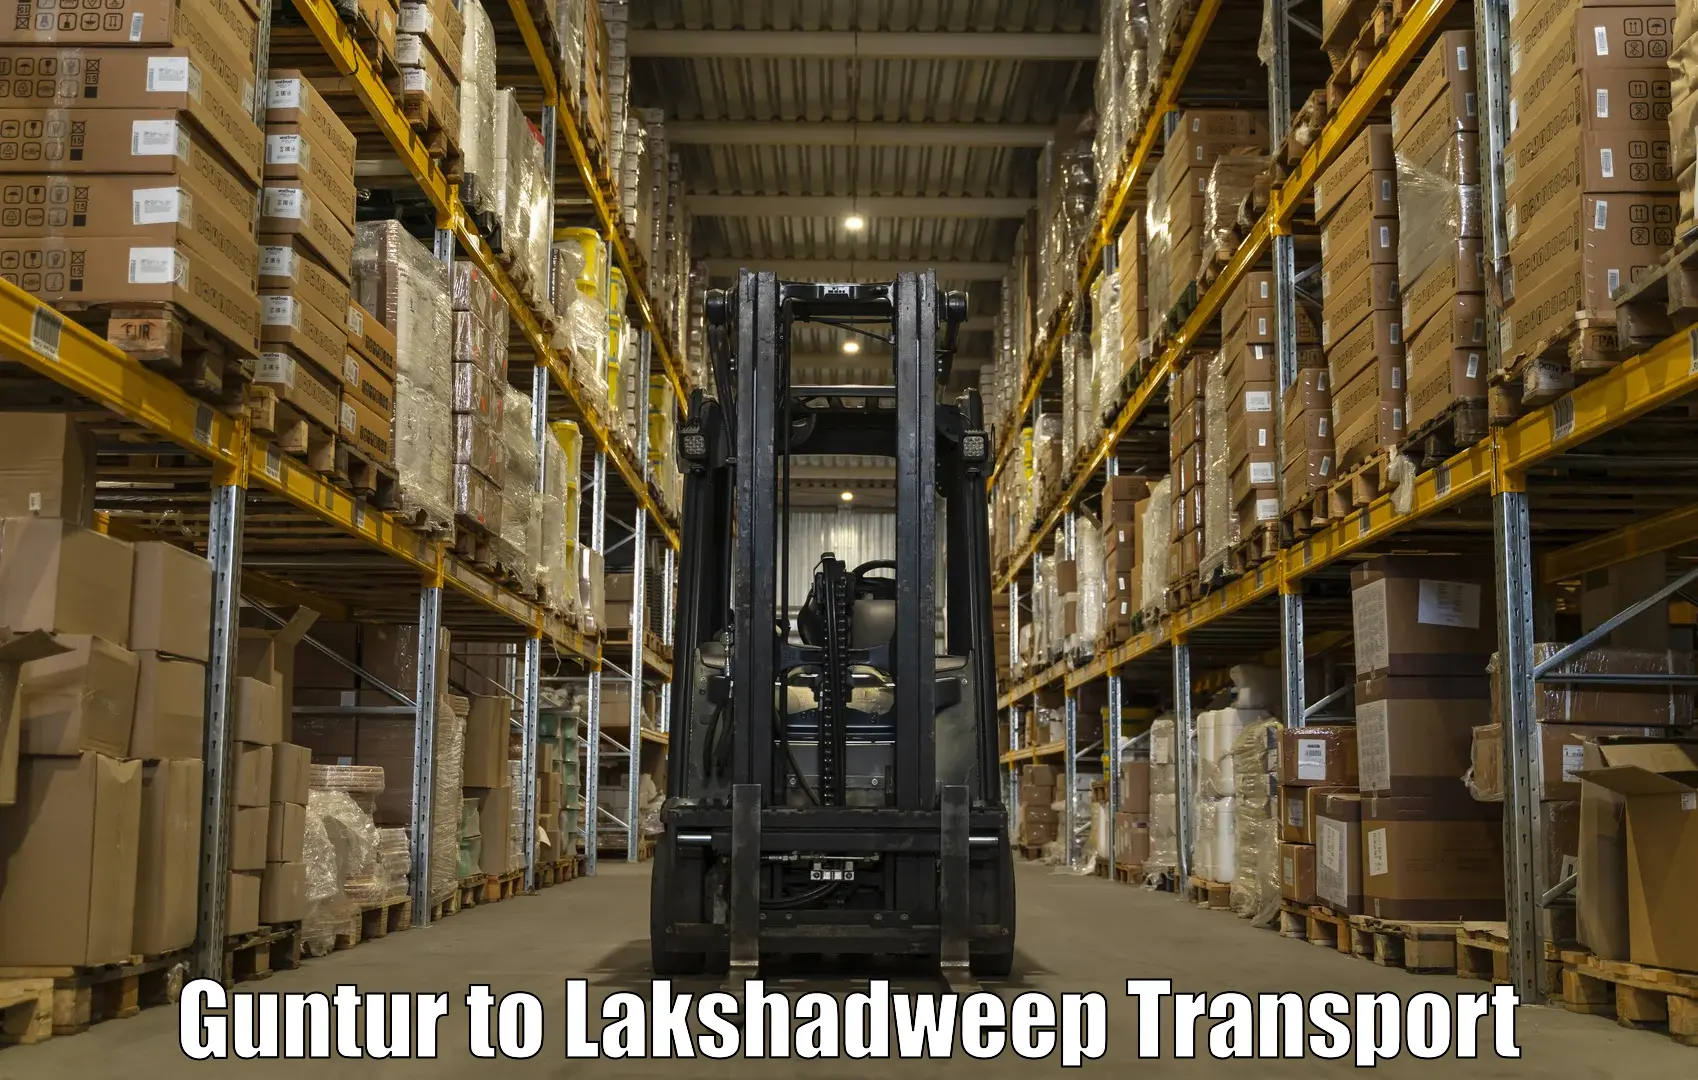 Transport bike from one state to another Guntur to Lakshadweep